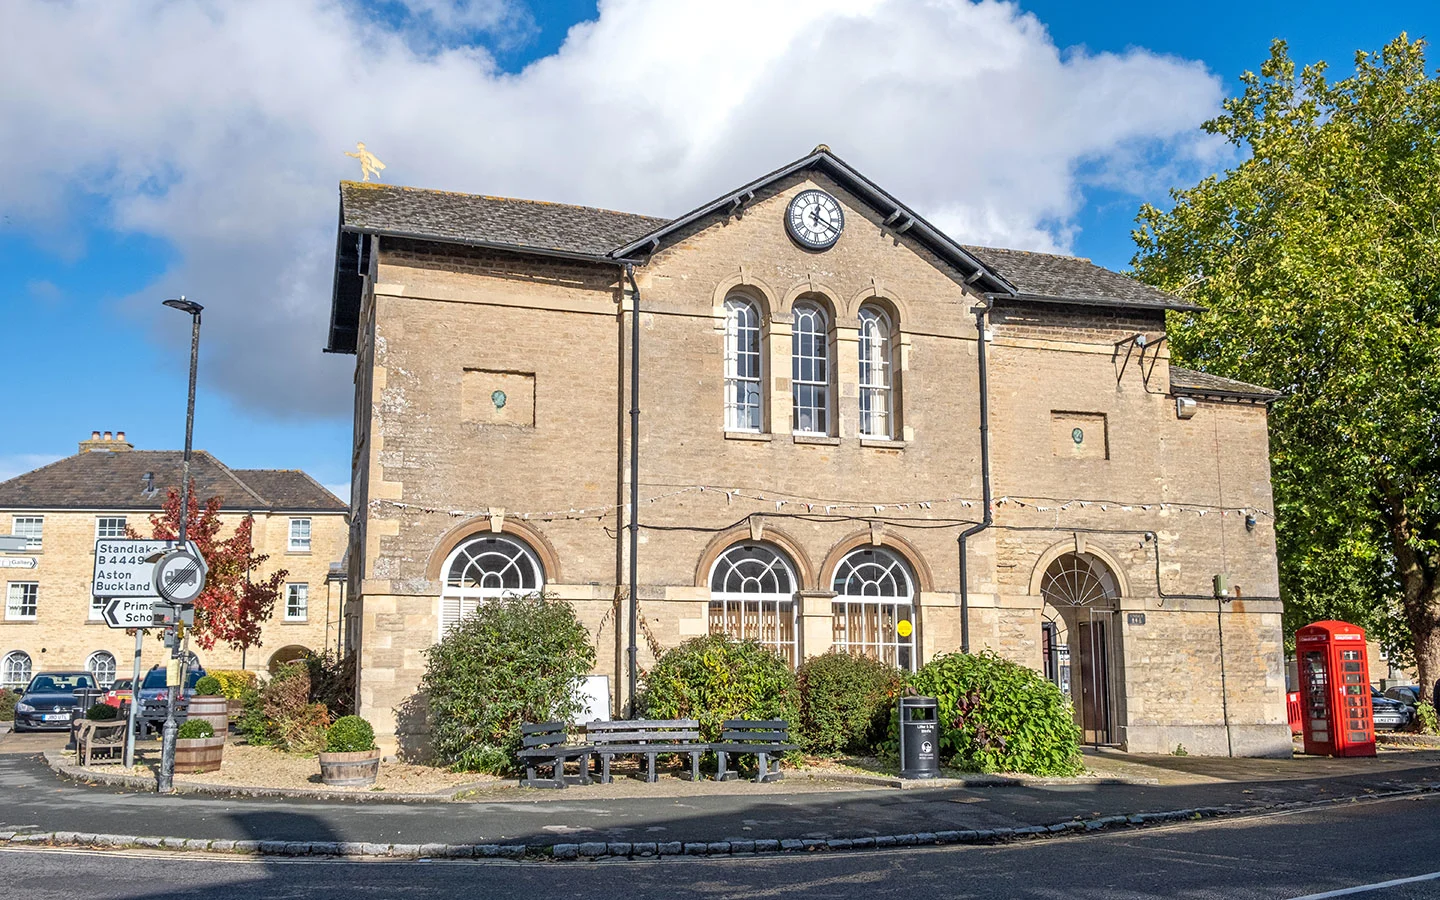 The town hall in Bampton's Market Square